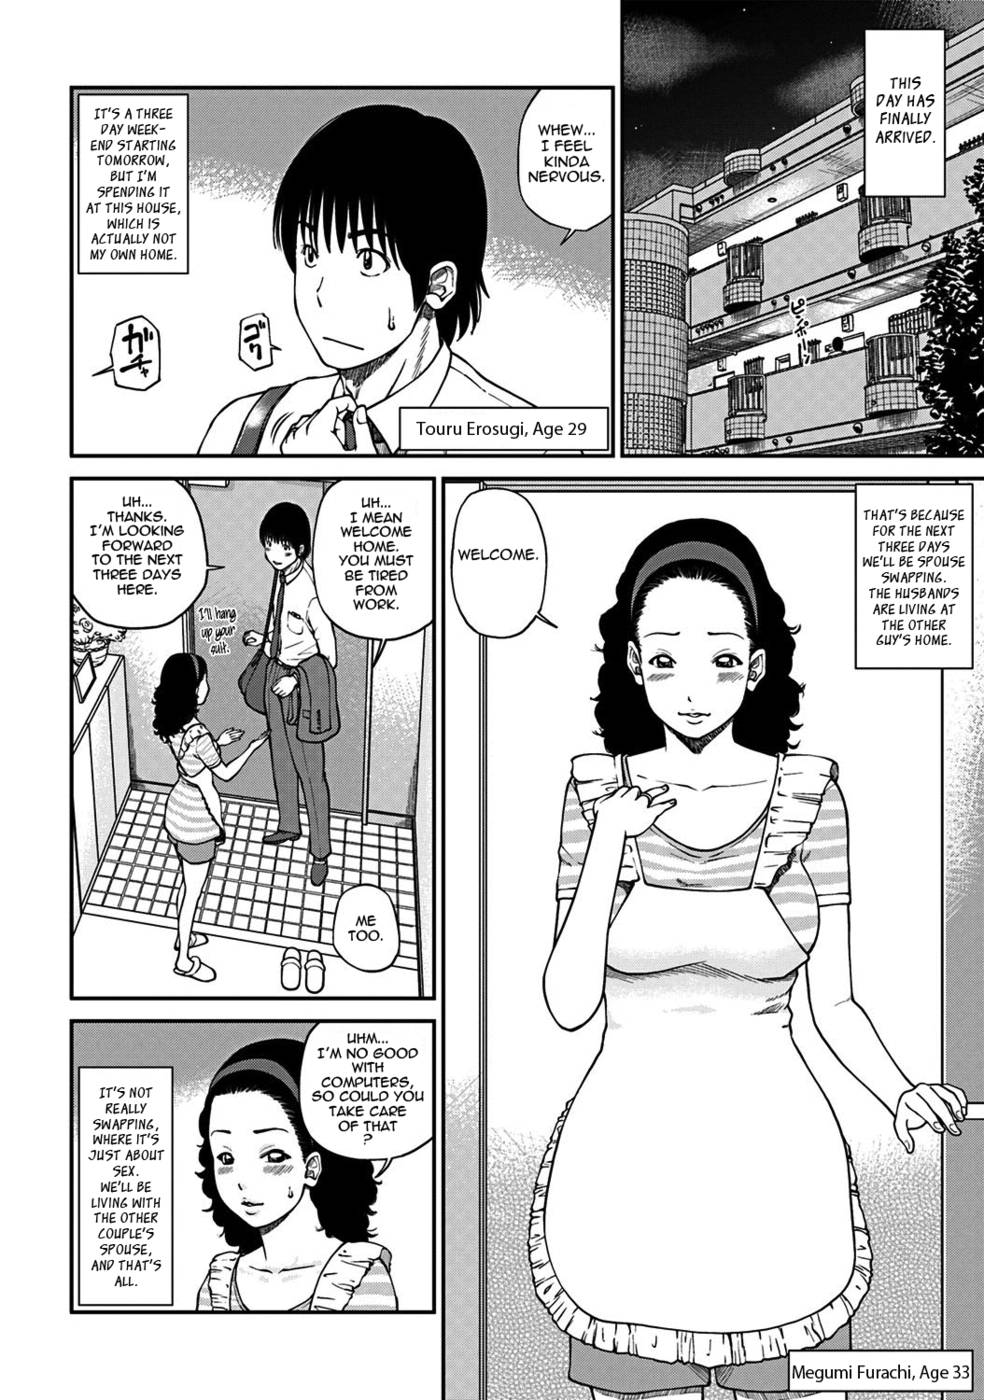 Hentai Manga Comic-33 Year Old Unsatisfied Wife-Chapter 2-Spouse Swapping-First Night-2